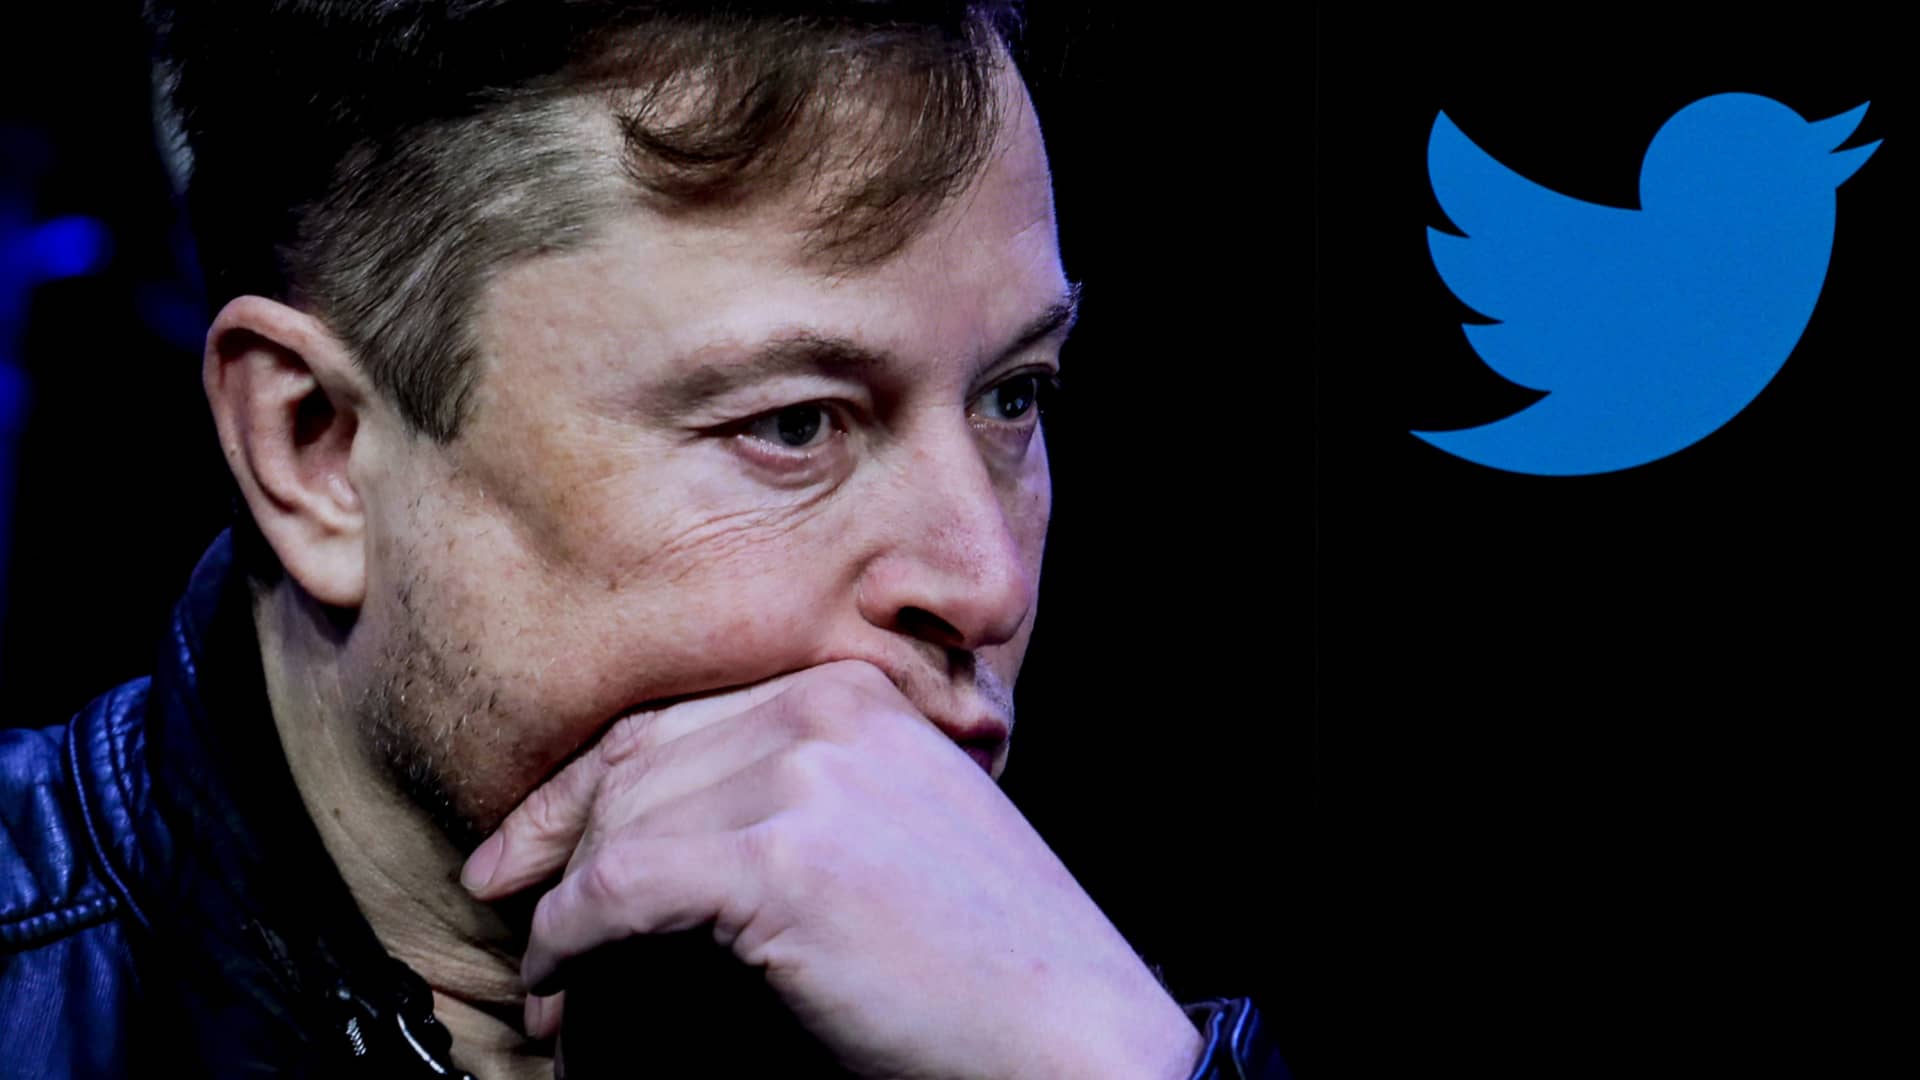 Musk must complete Twitter deal by Oct. 28 to avoid trial, judge rules